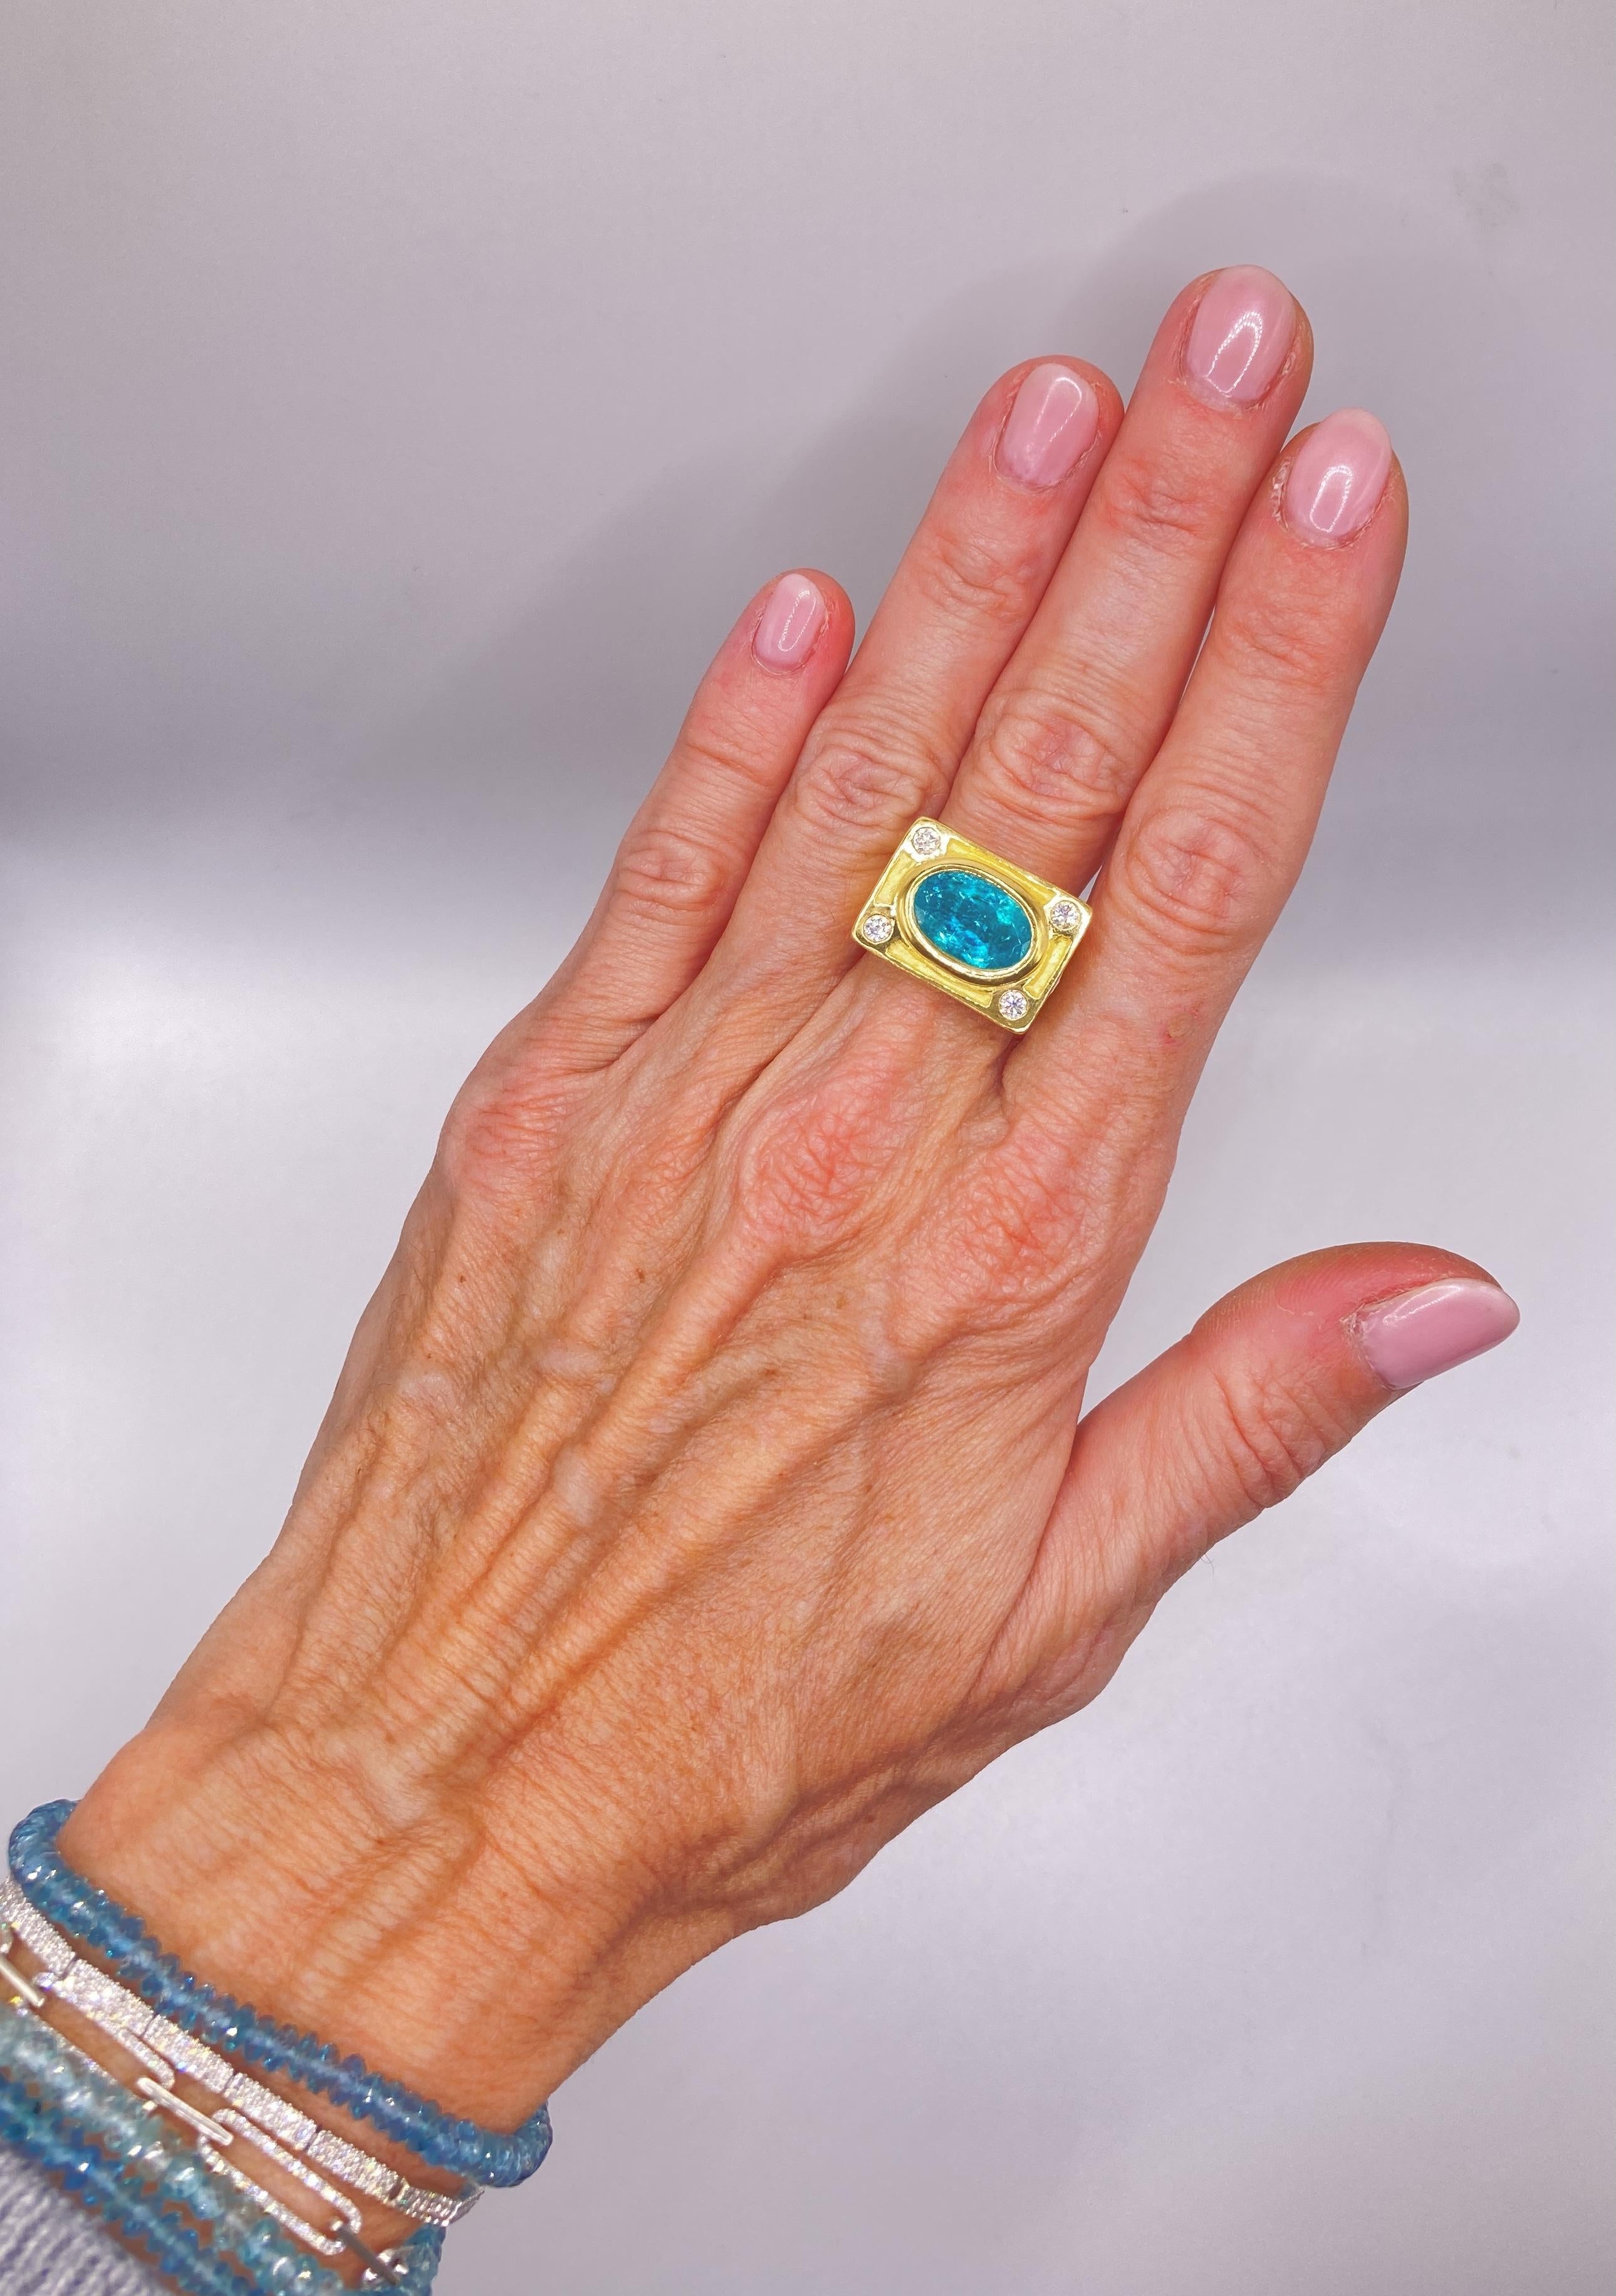 Signed by famous goldsmith Helene Courtaigne Delalande who designed this setting for me, this 5 Carat  Paraiba Tourmaline is neon blue with a whole universe of inclusions. Helen and I were both exhibitors at the Carrousel du Louvre Jewelry show in